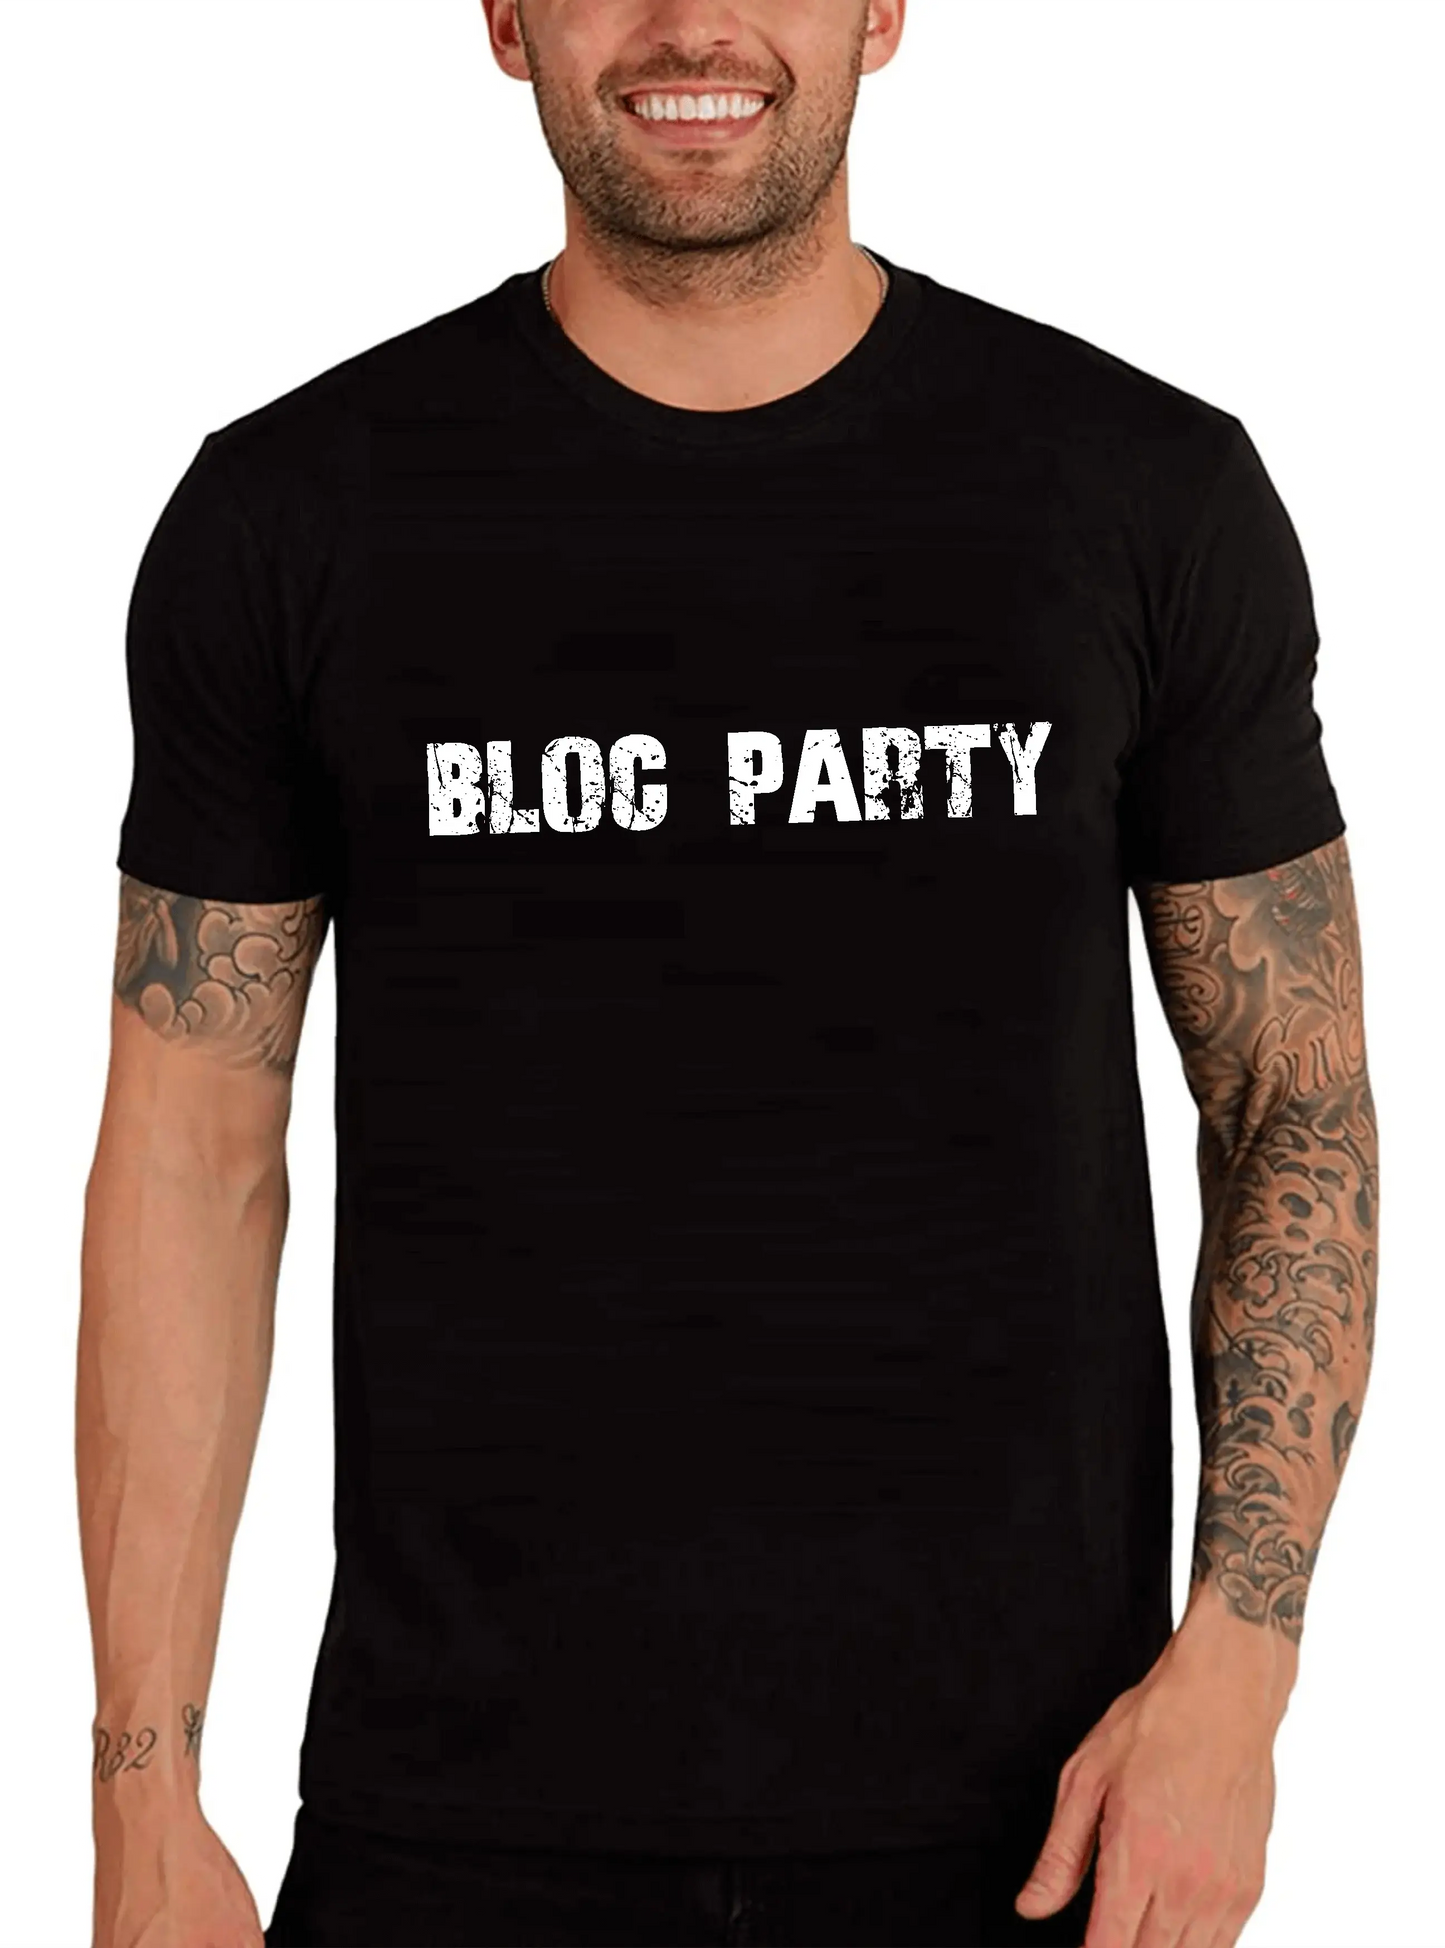 Men's Graphic T-Shirt Bloc Party Eco-Friendly Limited Edition Short Sleeve Tee-Shirt Vintage Birthday Gift Novelty